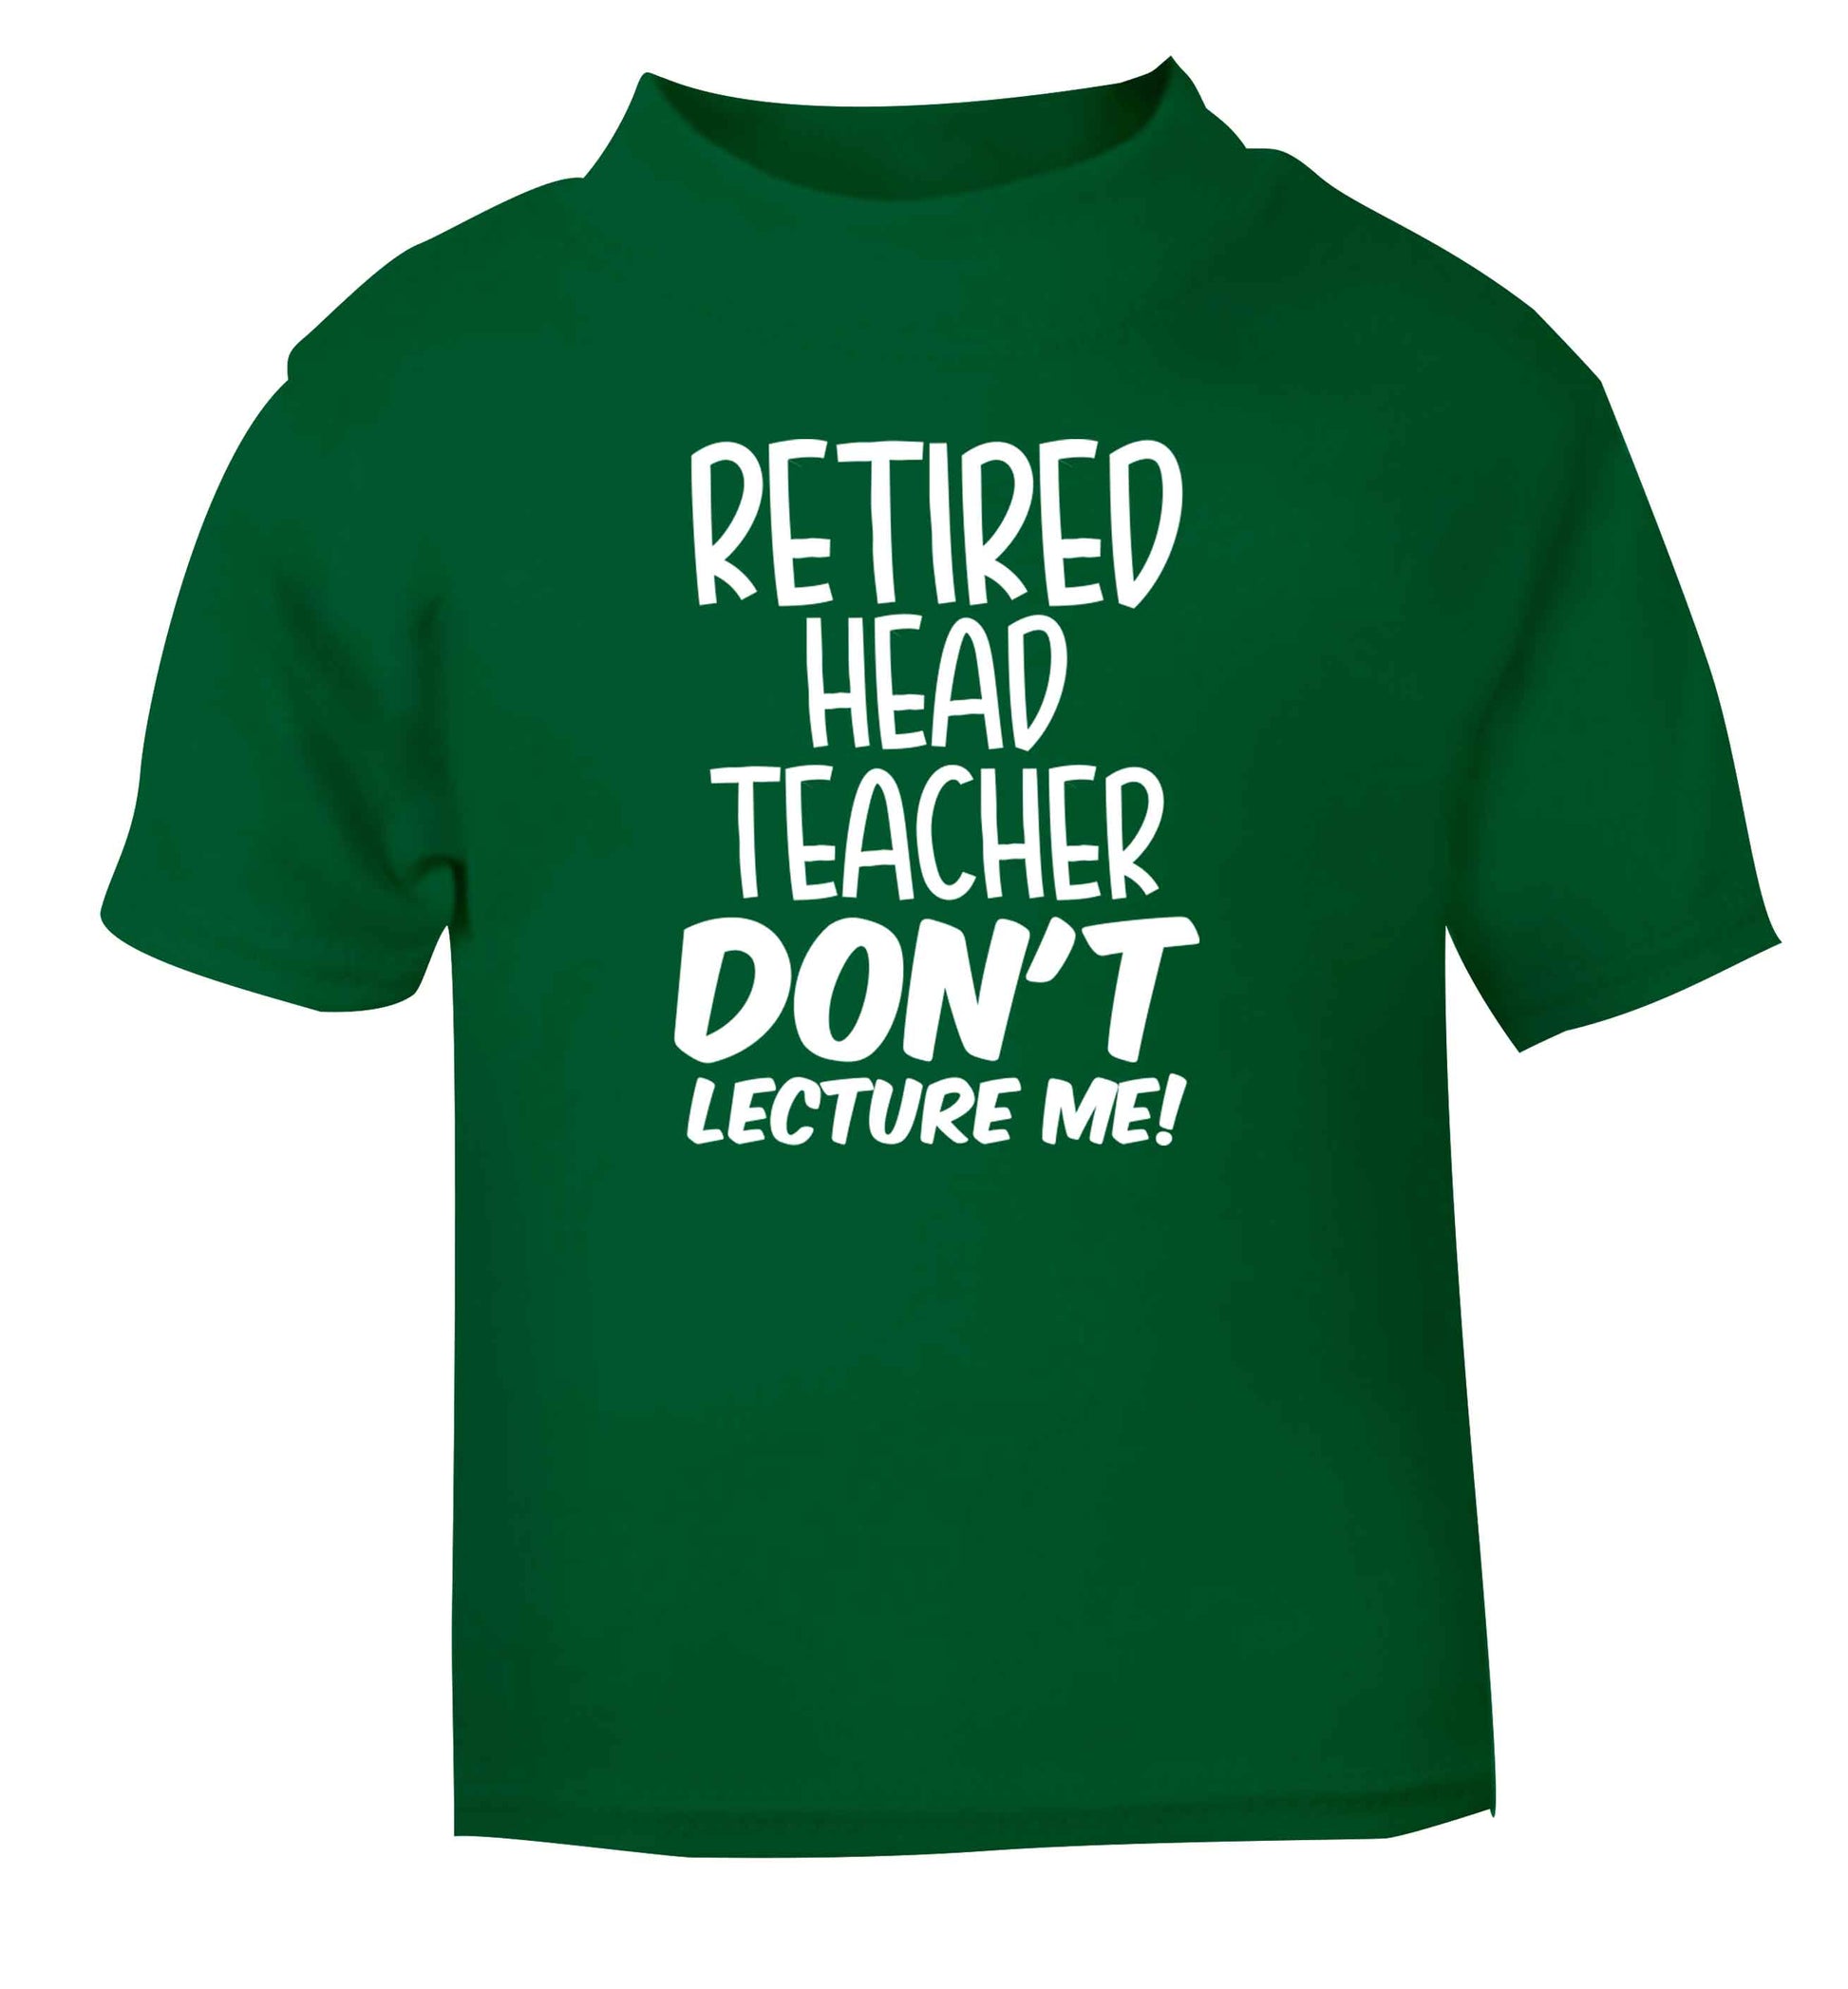 Retired head teacher don't lecture me! green Baby Toddler Tshirt 2 Years